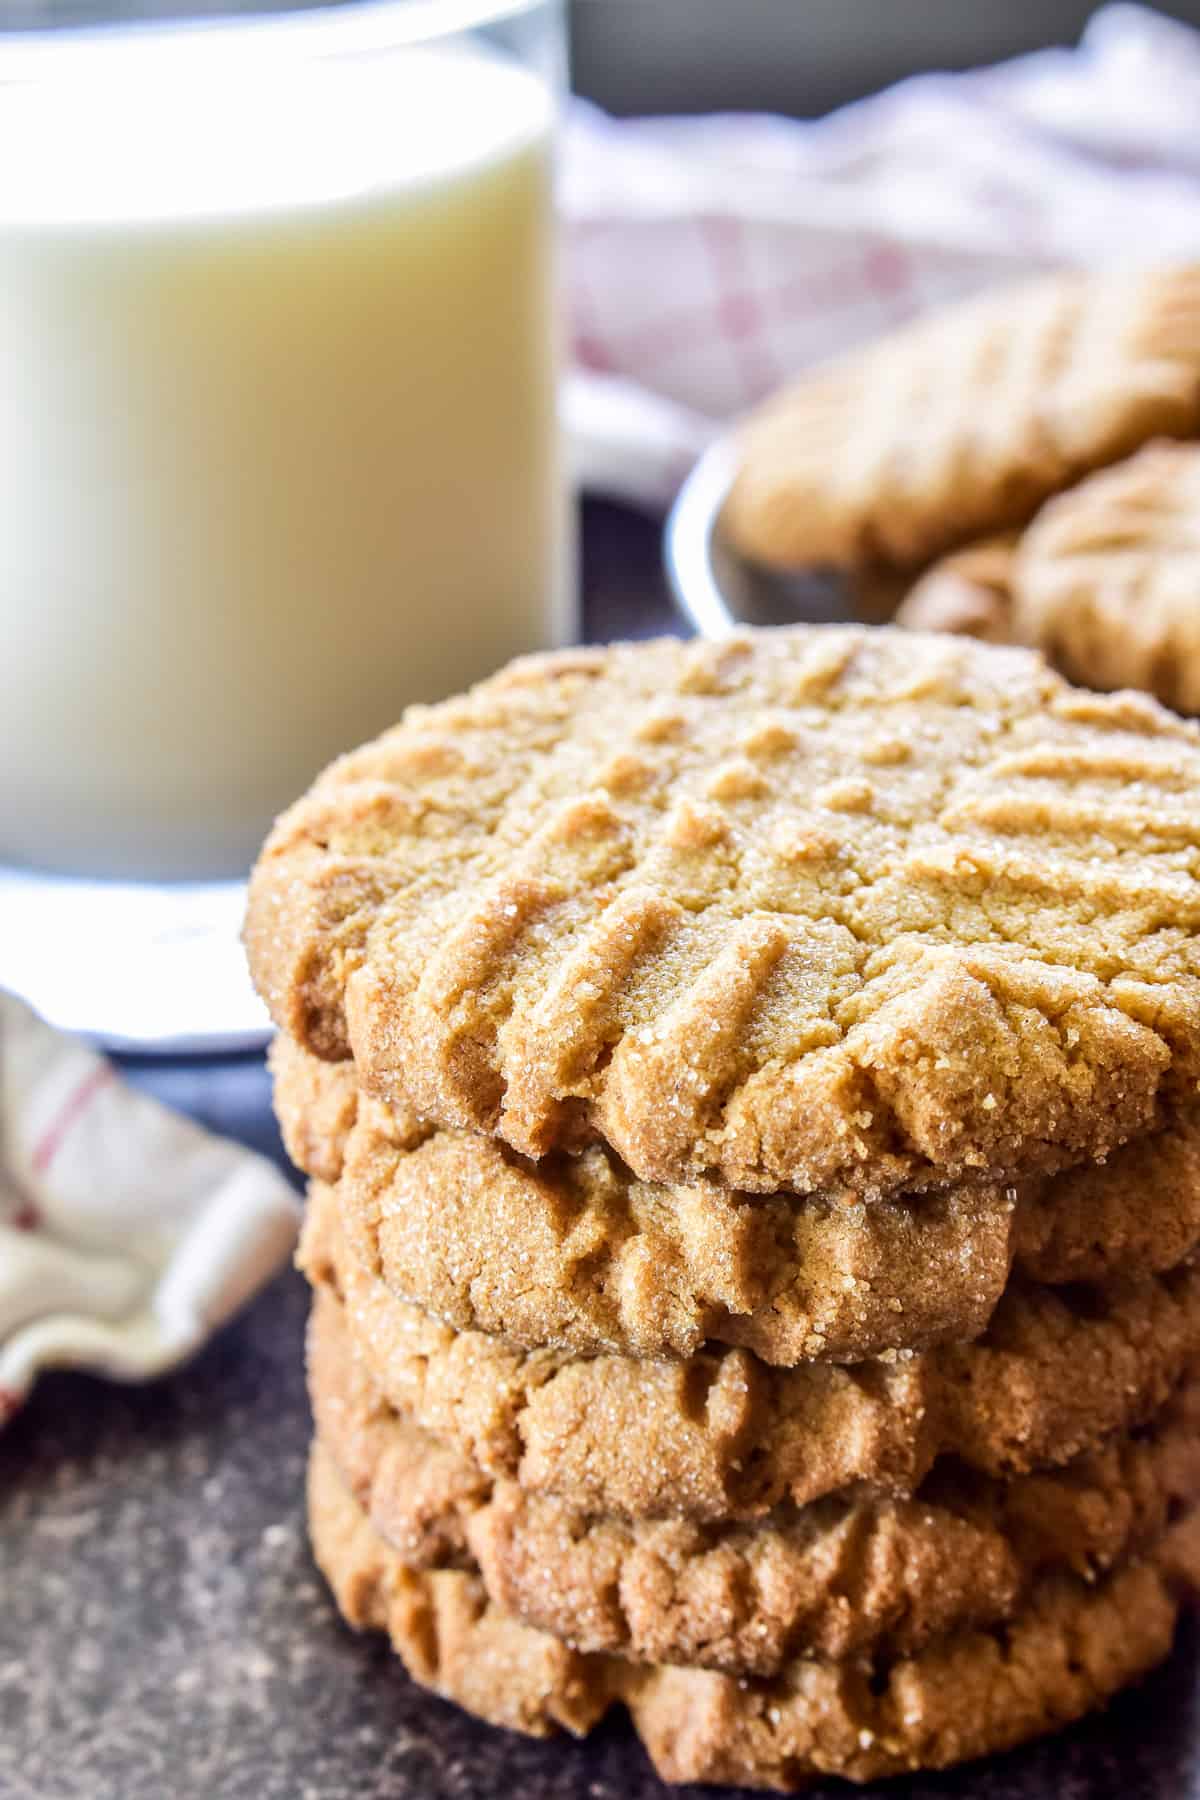 Stack of 5 peanut butter cookies with a glass of milk